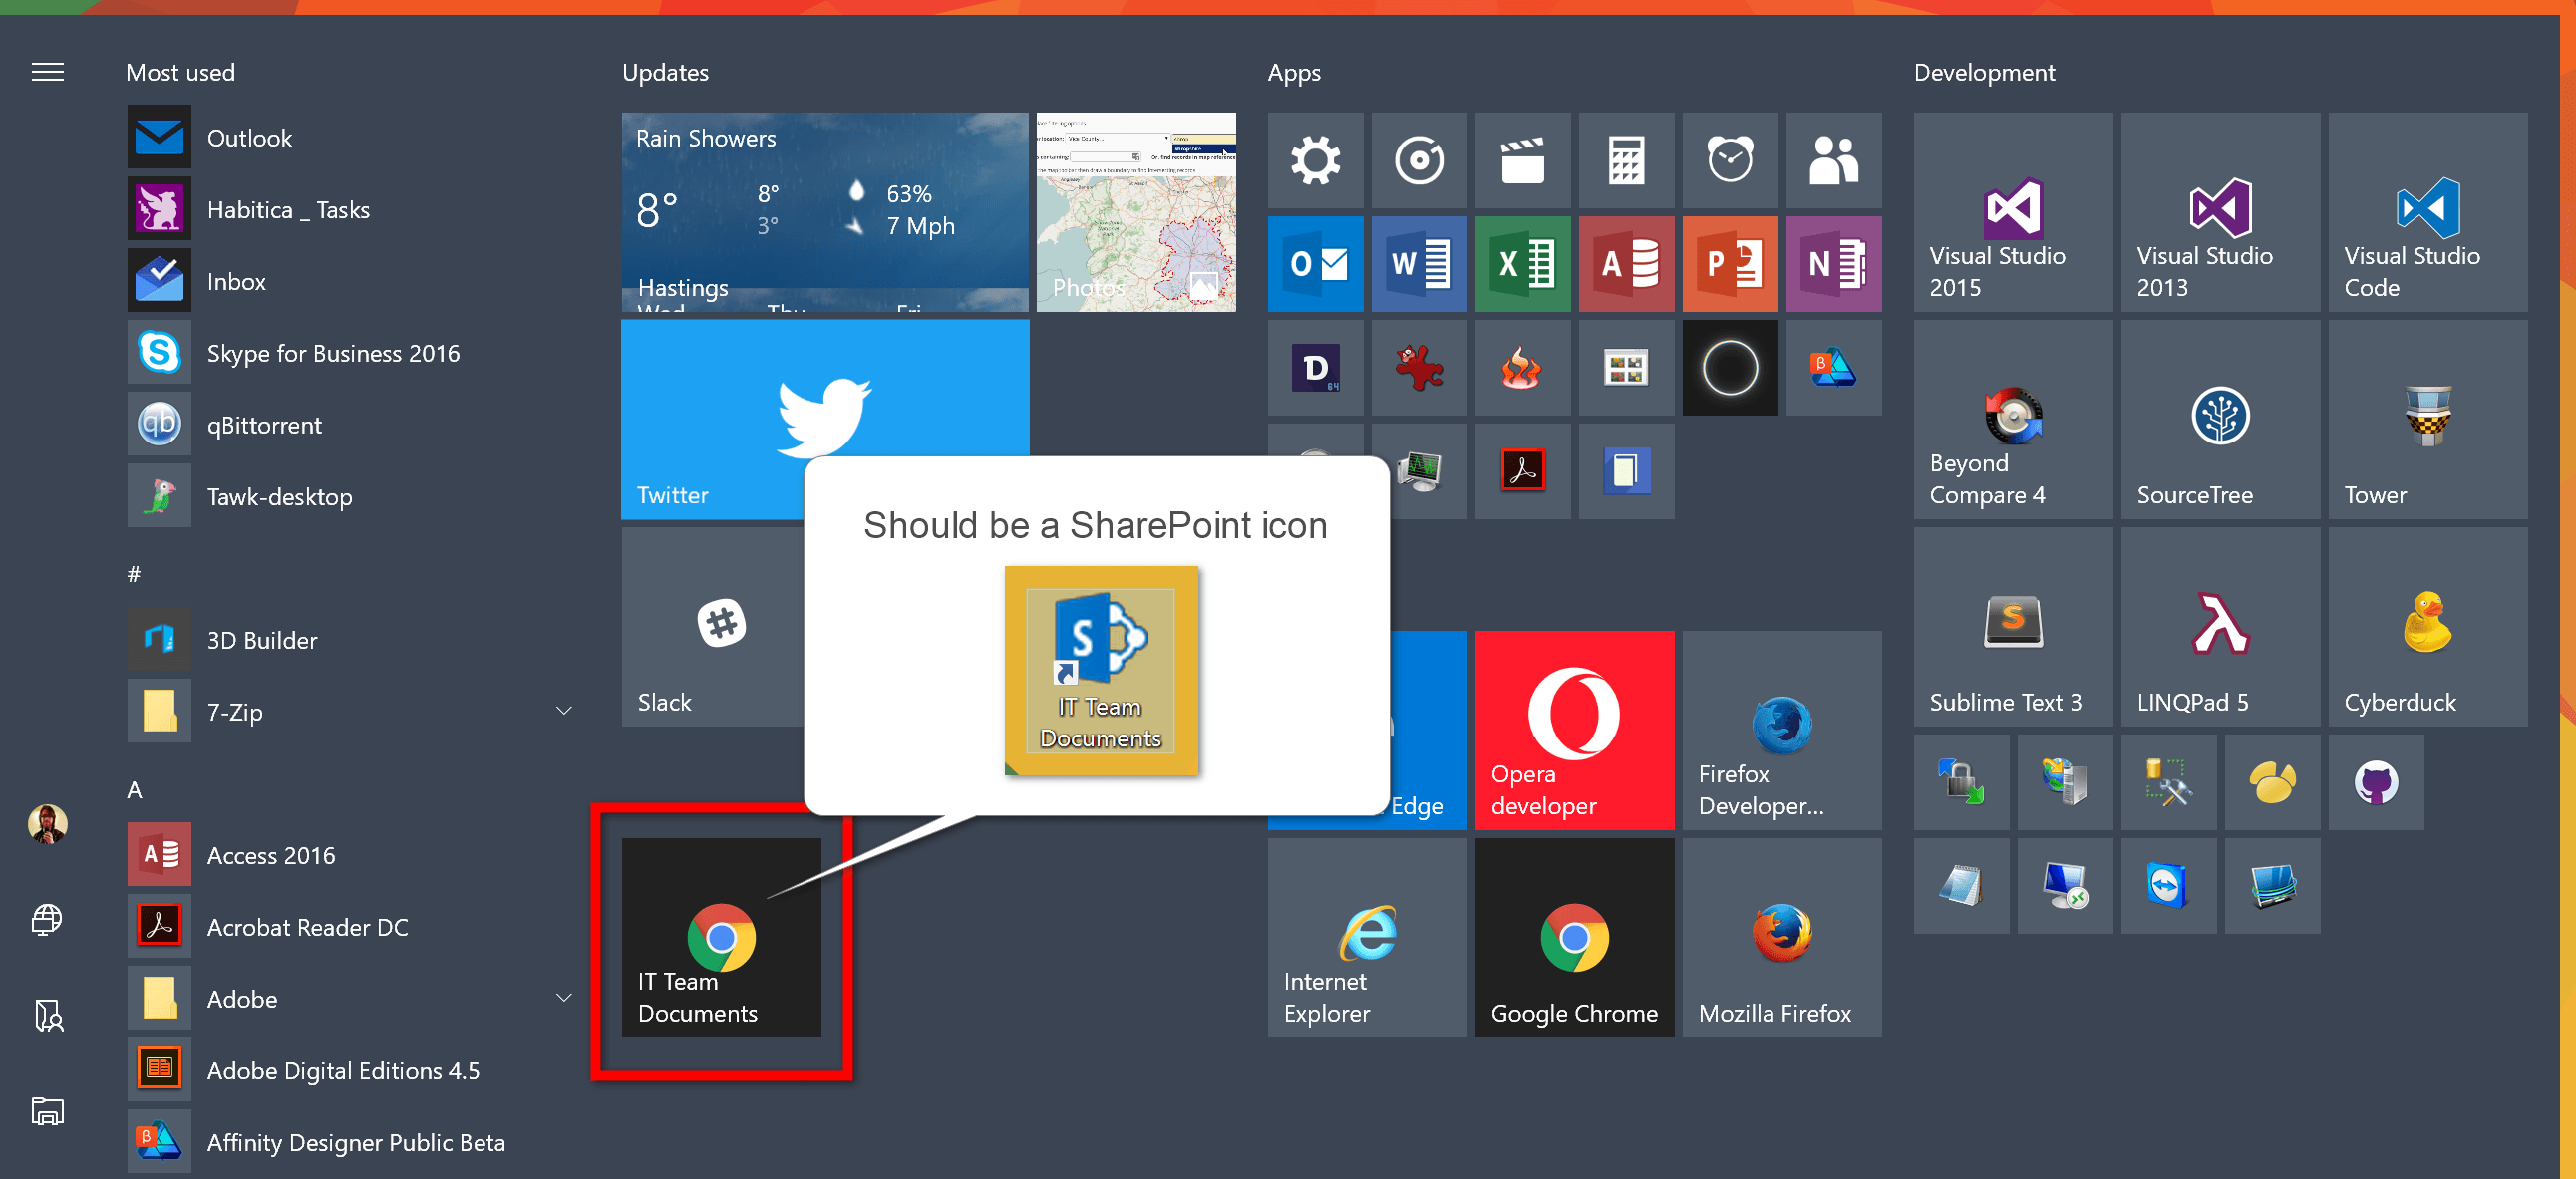 Chrome Windows Logo - How to get Chrome favicons to appear in Windows 10 start menu ...